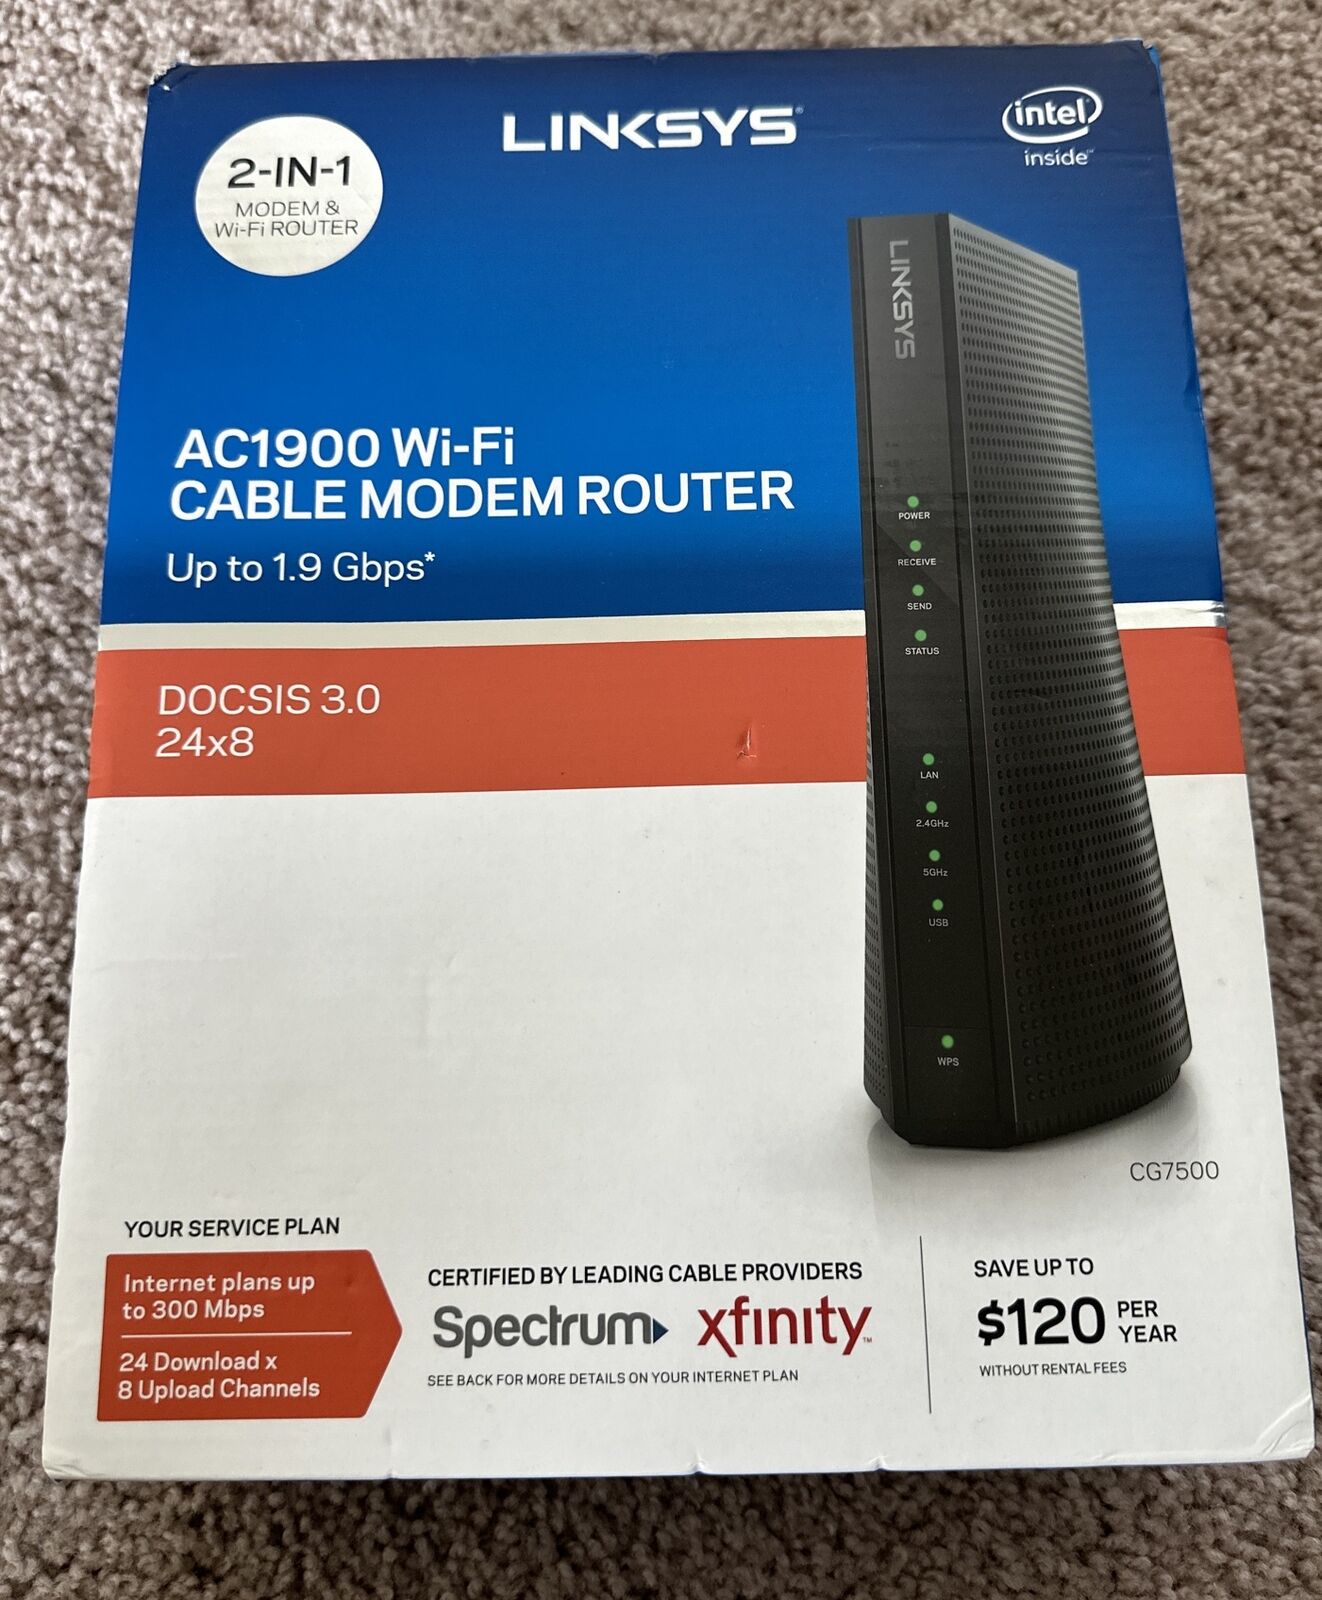 LINKSYS AC1900 DUAL-BAND WI-FI CABLE MODEM ROUTER